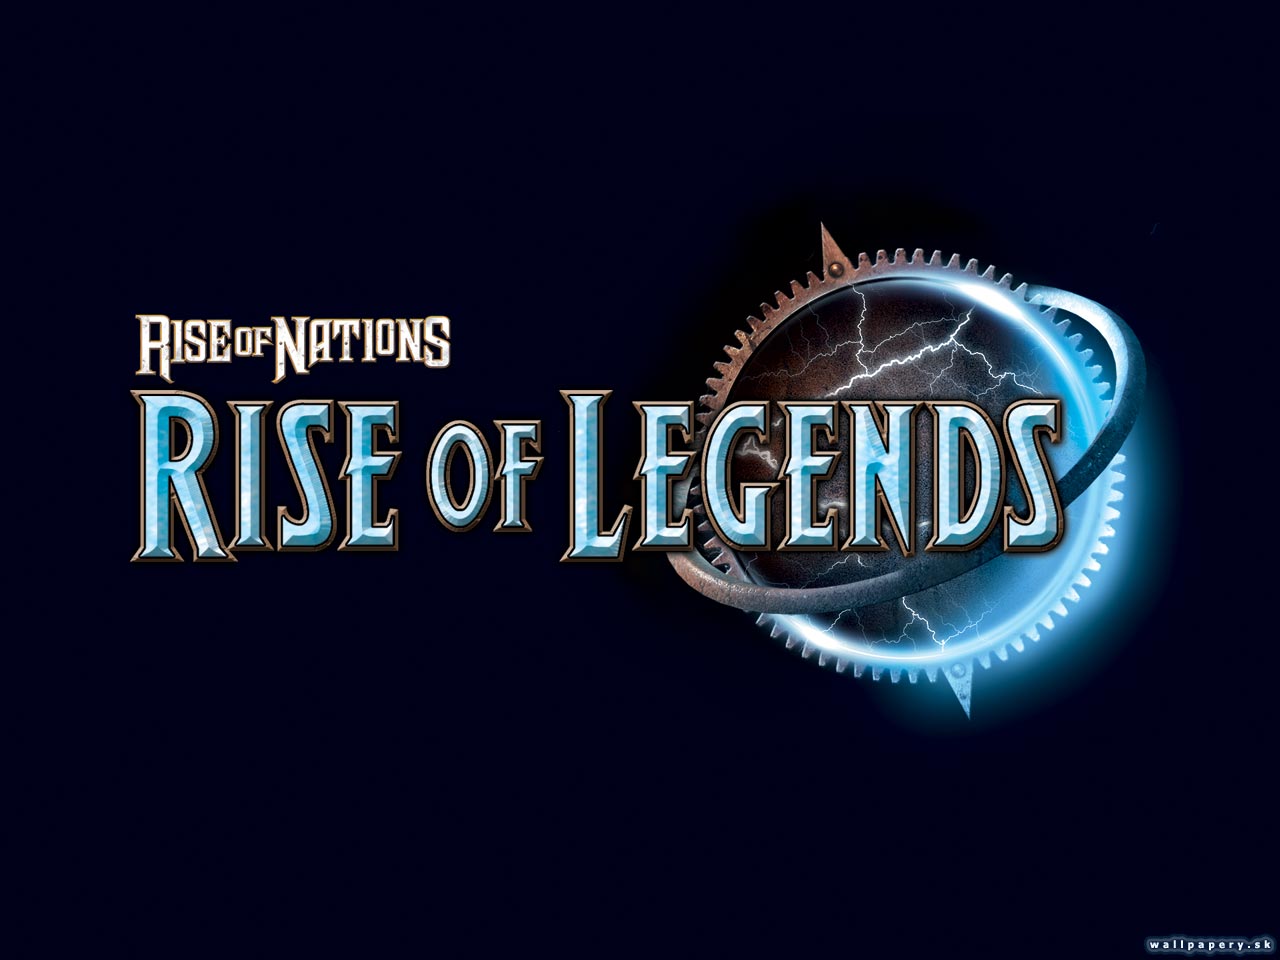 Rise of Nations: Rise of Legends - wallpaper 4